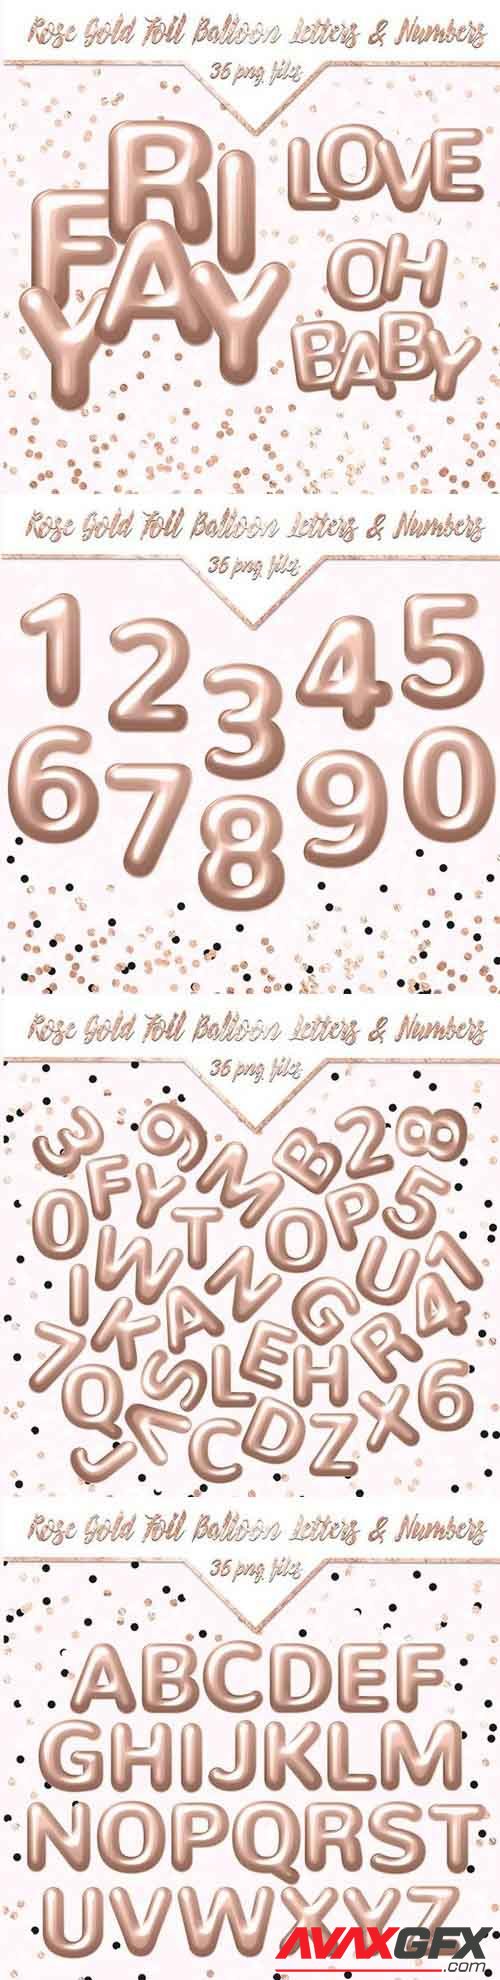 Rose Gold Foil Balloon Letters & Numbers - 1158291